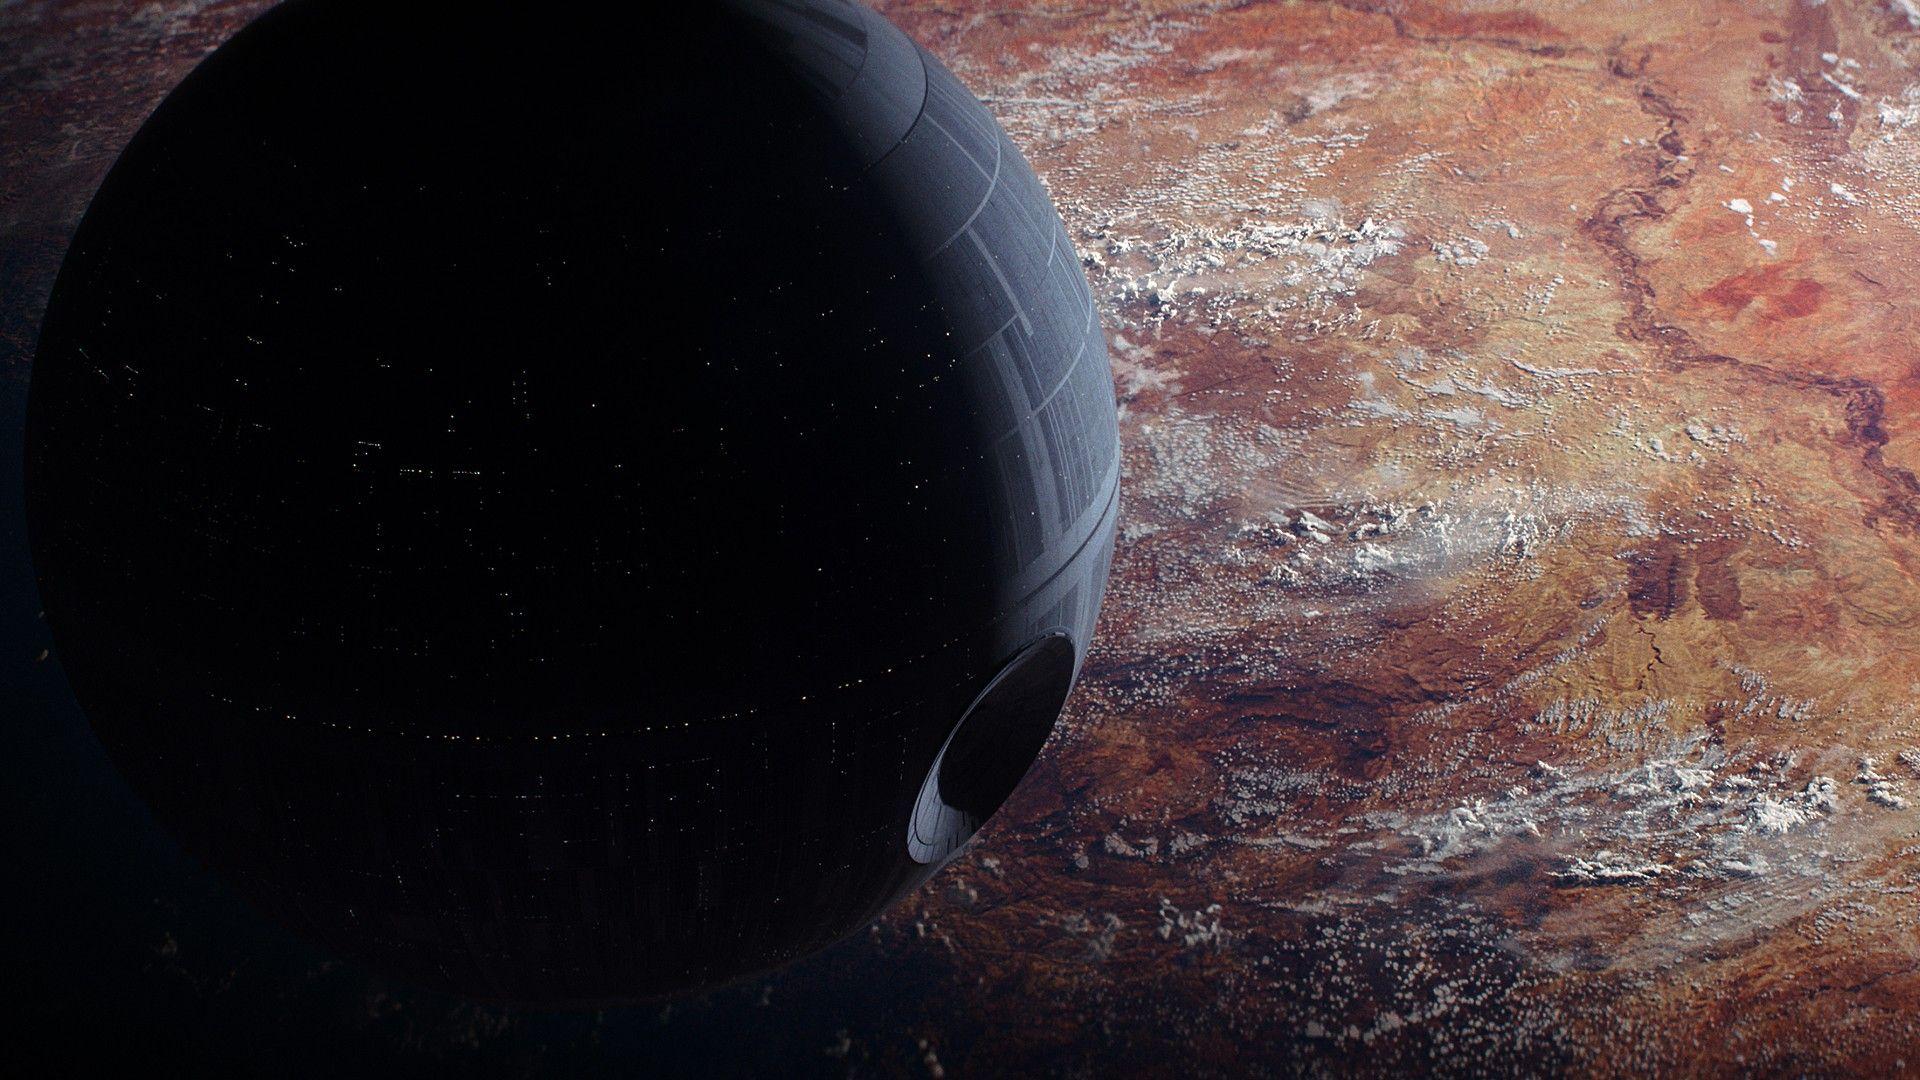 Rogue One: A Star Wars Story, #Star Wars, #movies, #Death Star